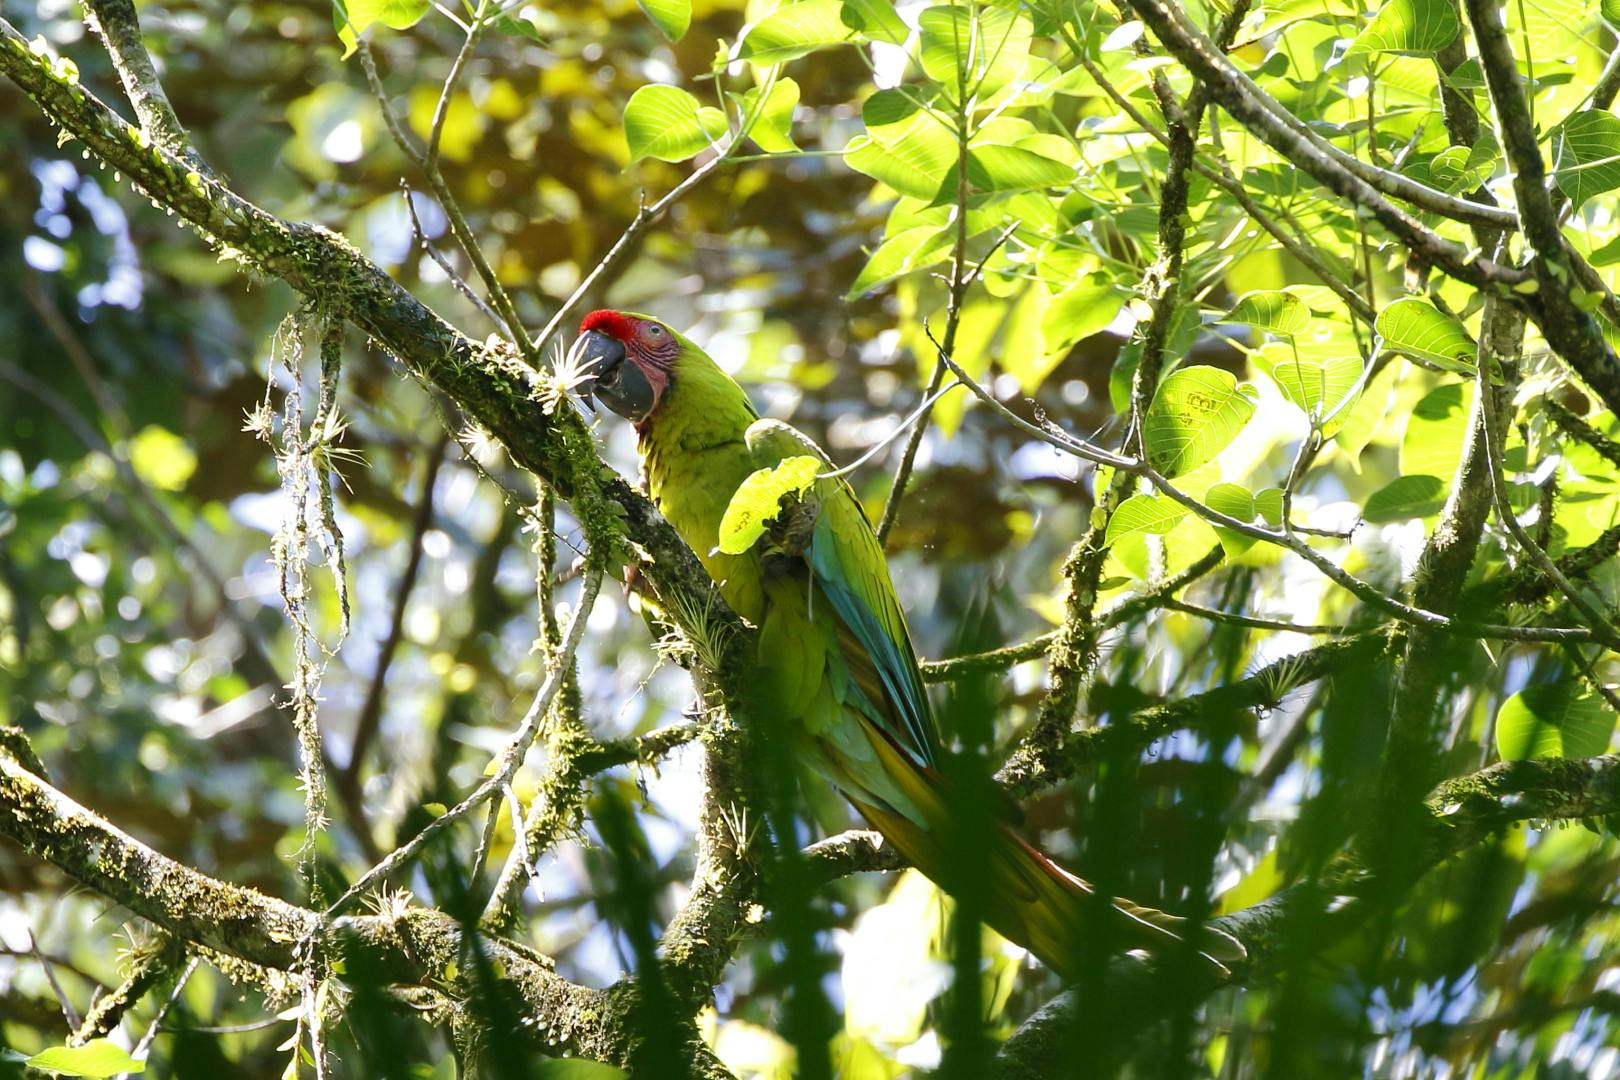 Migration biocorridor for the Great Green Macaw